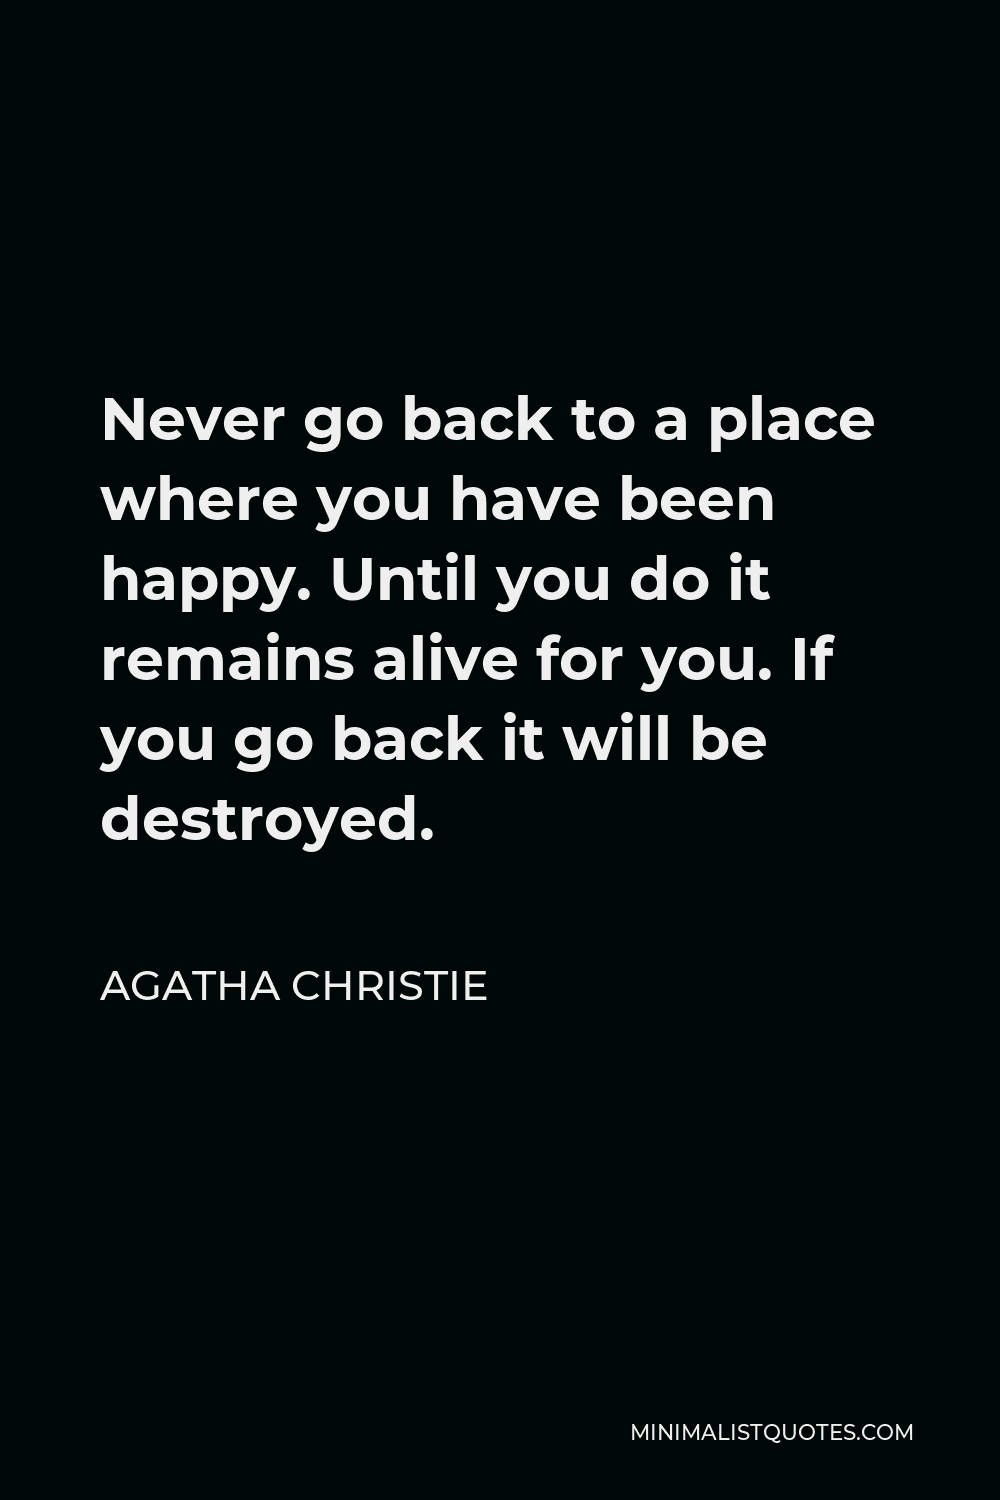 Agatha Christie Quote - Never go back to a place where you have been happy. Until you do it remains alive for you. If you go back it will be destroyed.